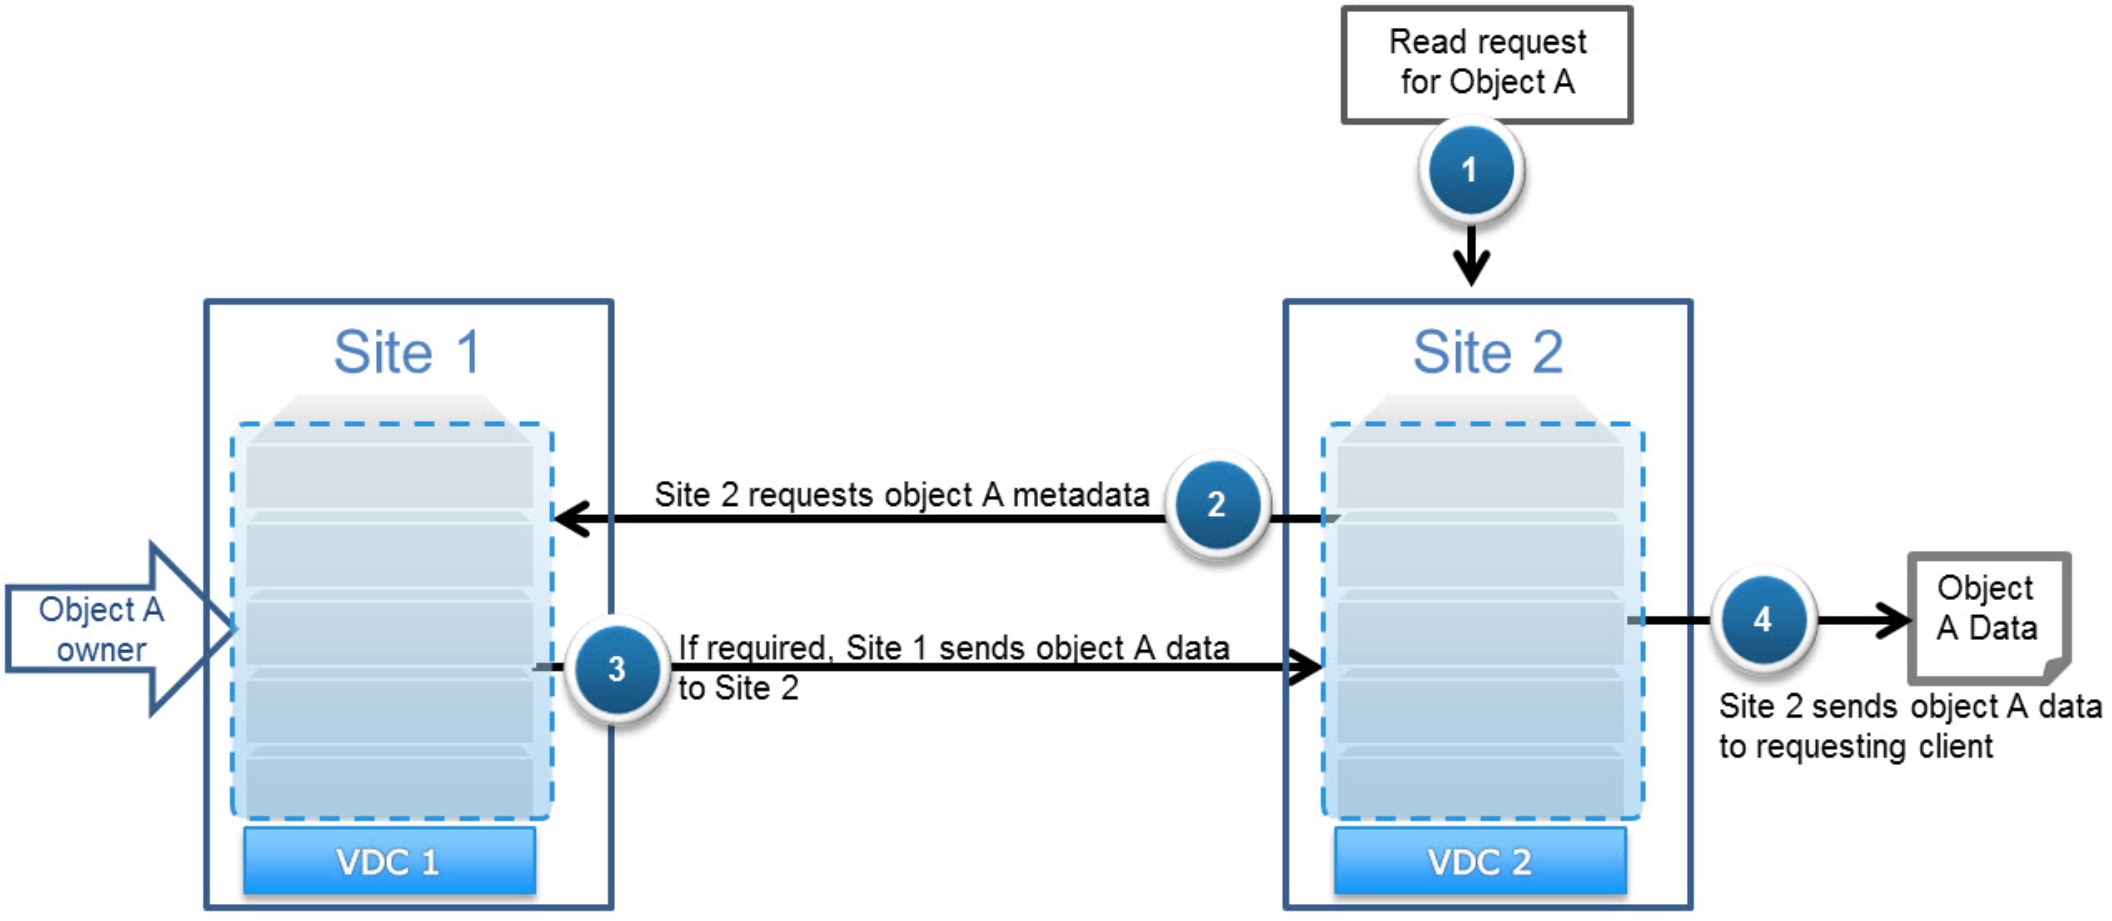 This is example of reading data workflow for a geo-replicated object owned by another site